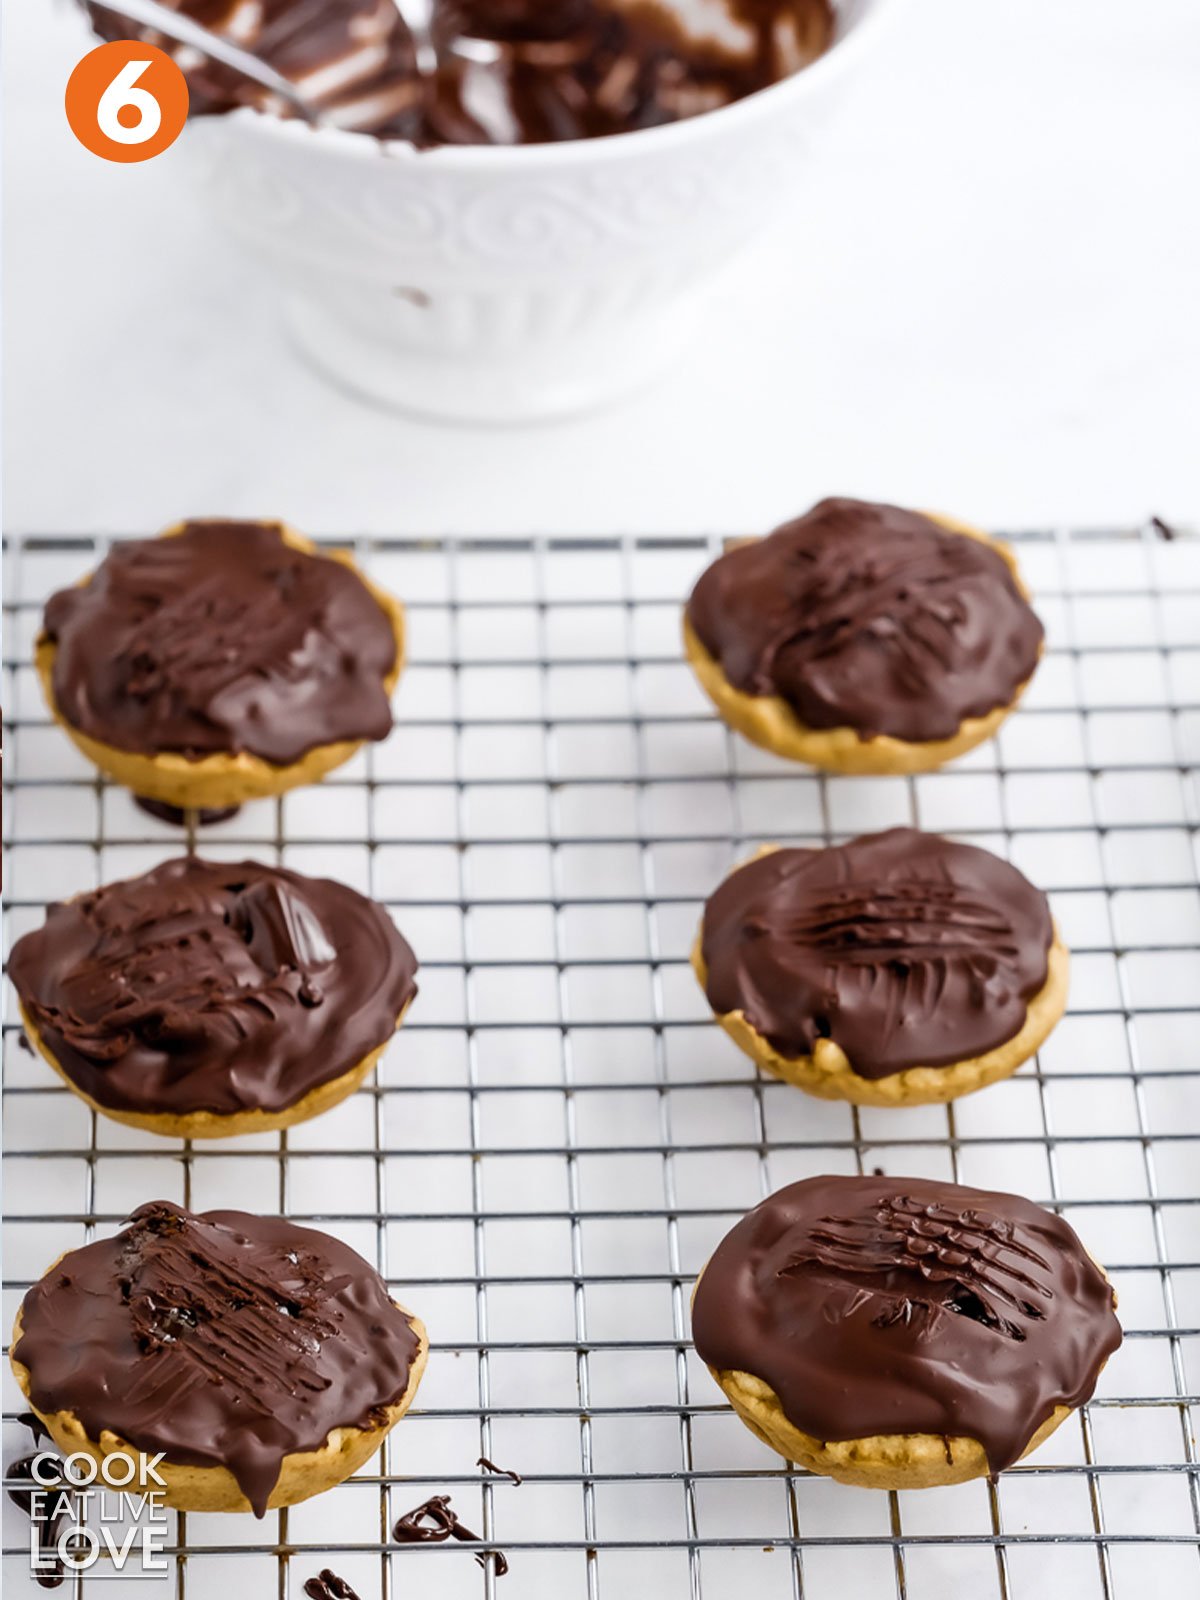 Jaffa cakes topped with chocolate all ready to eat on a wire rack.